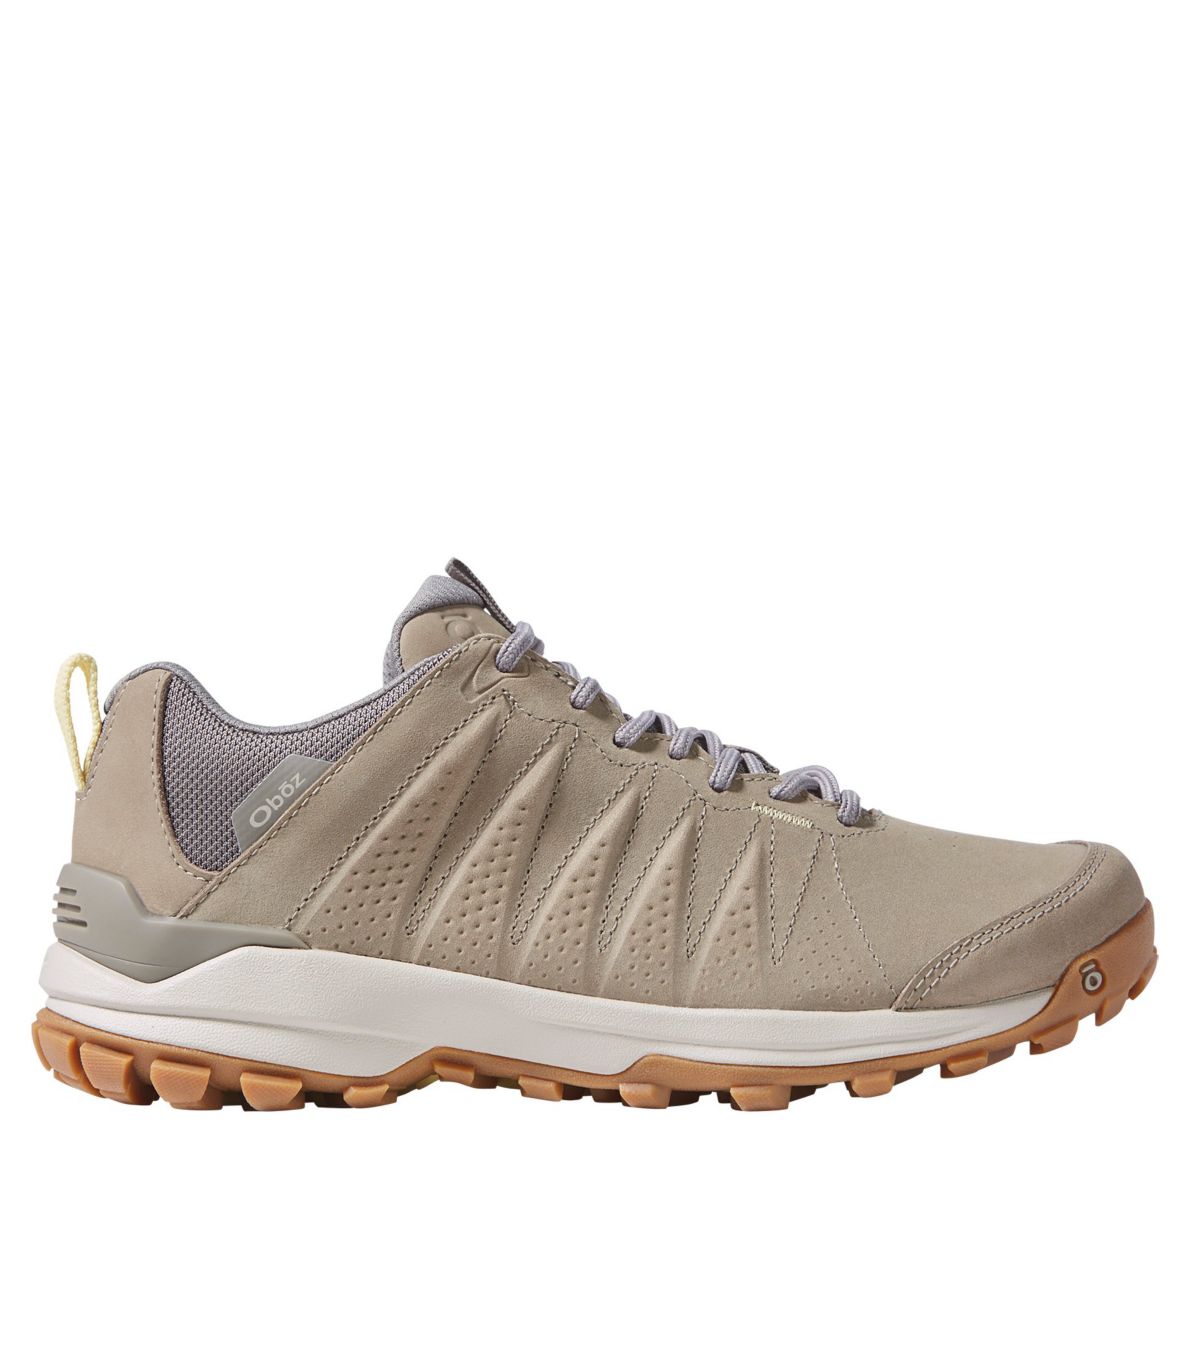 Women's Oboz Sypes Low Leather B-Dry Trail Shoes